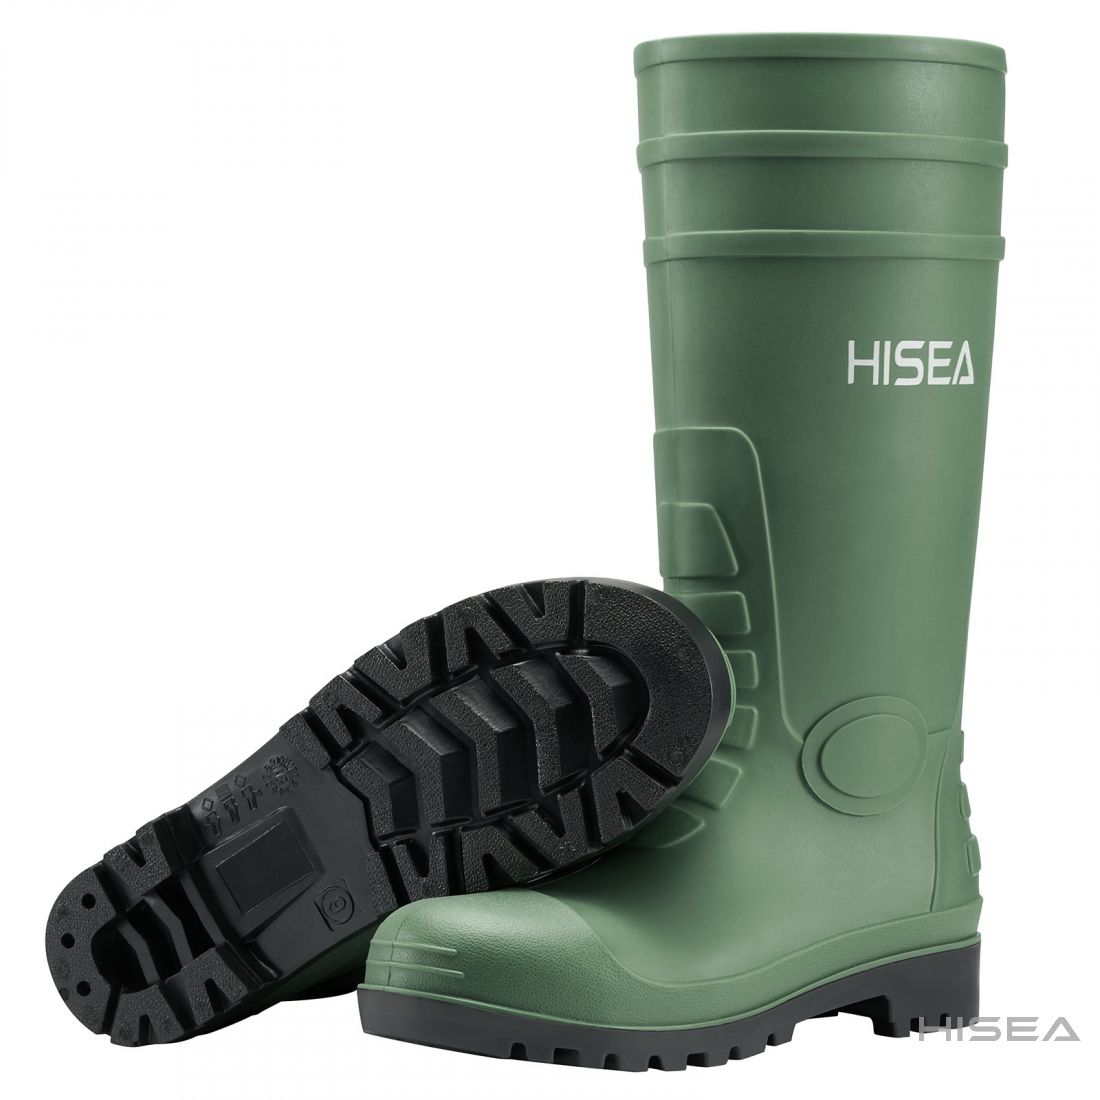 HISEA Work Boots for Men Soft/Steel Toe Boots Breathable EH and Water/Slip Resistant Men's Boots 